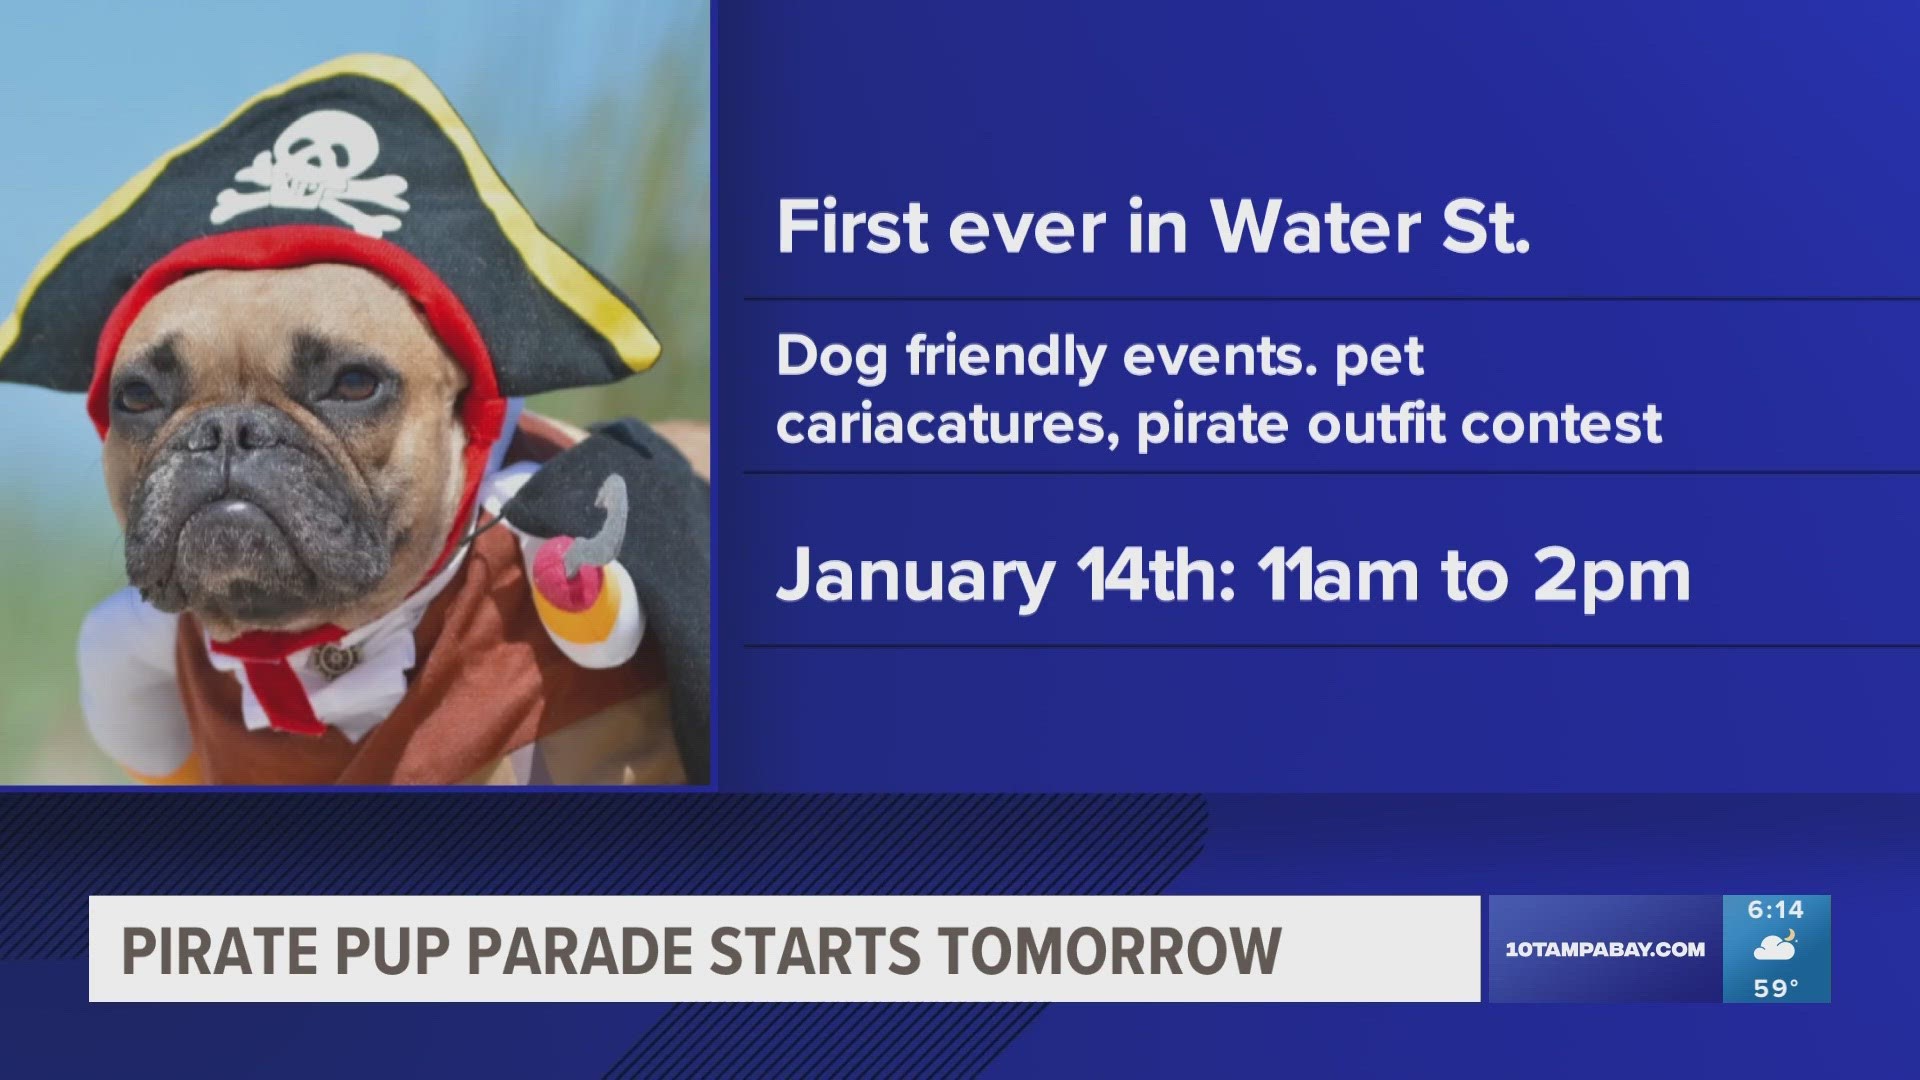 Along with a parade, there will be pet adoptions, face painting and pet caricatures.